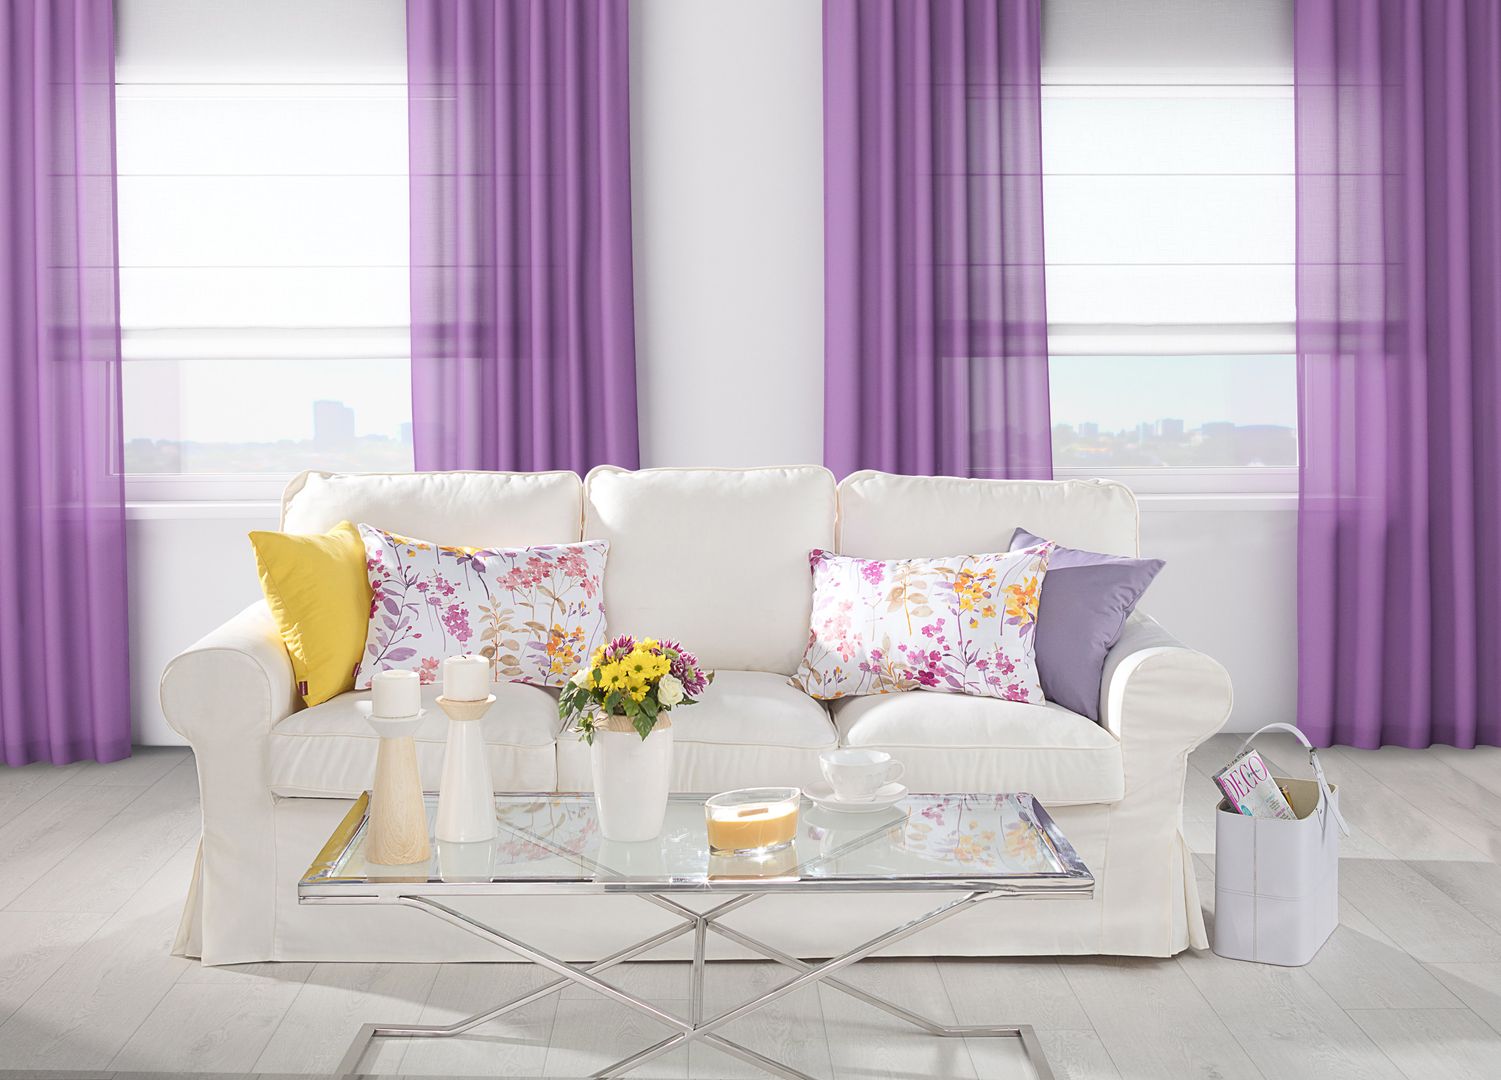 Redesign: Modern Shabby Chic Ultraviolet Living Room Dekoria.co.uk Living room Textile Amber/Gold Accessories & decoration